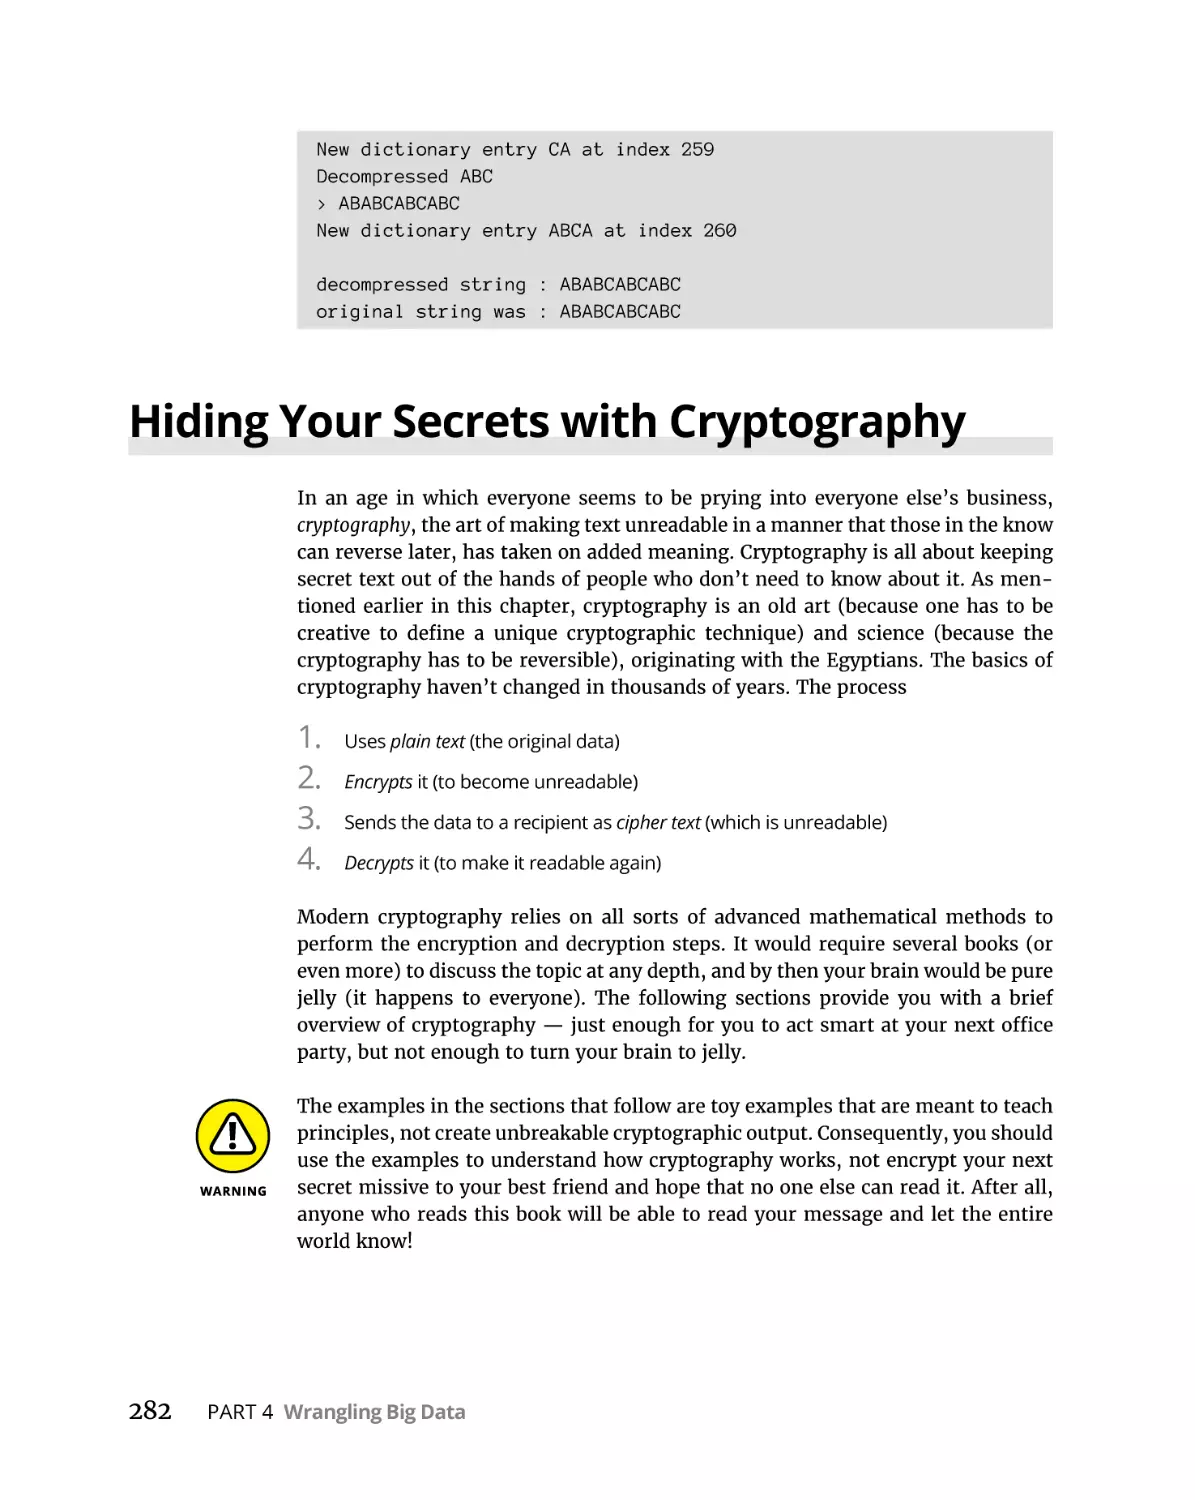 Hiding Your Secrets with Cryptography